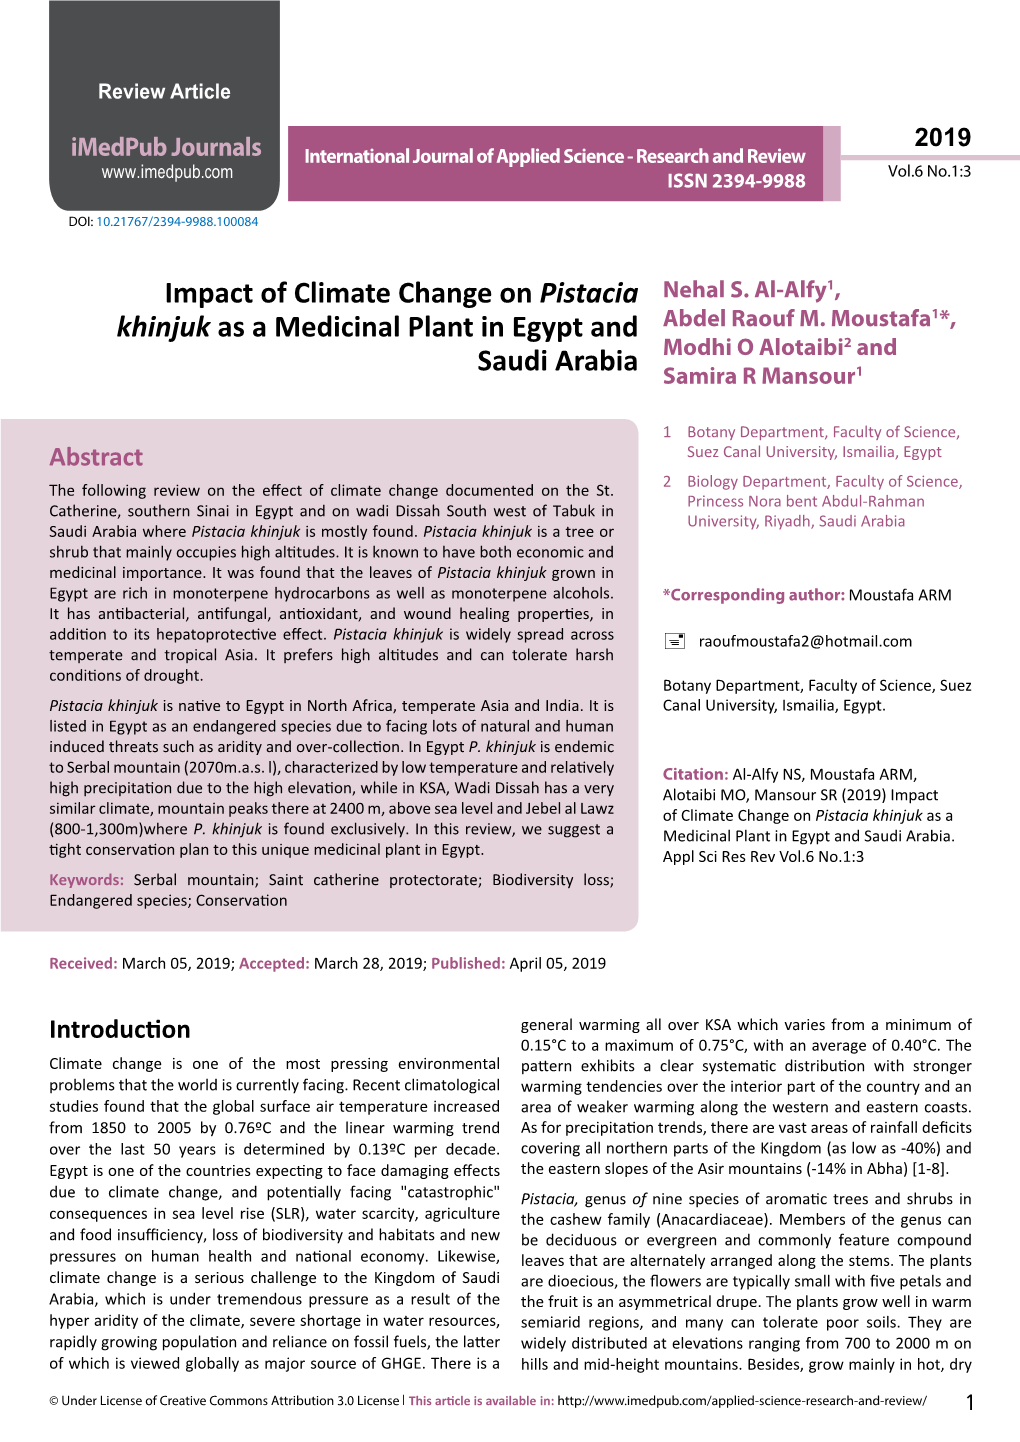 Impact of Climate Change on Pistacia Khinjuk As a Medicinal Plant In